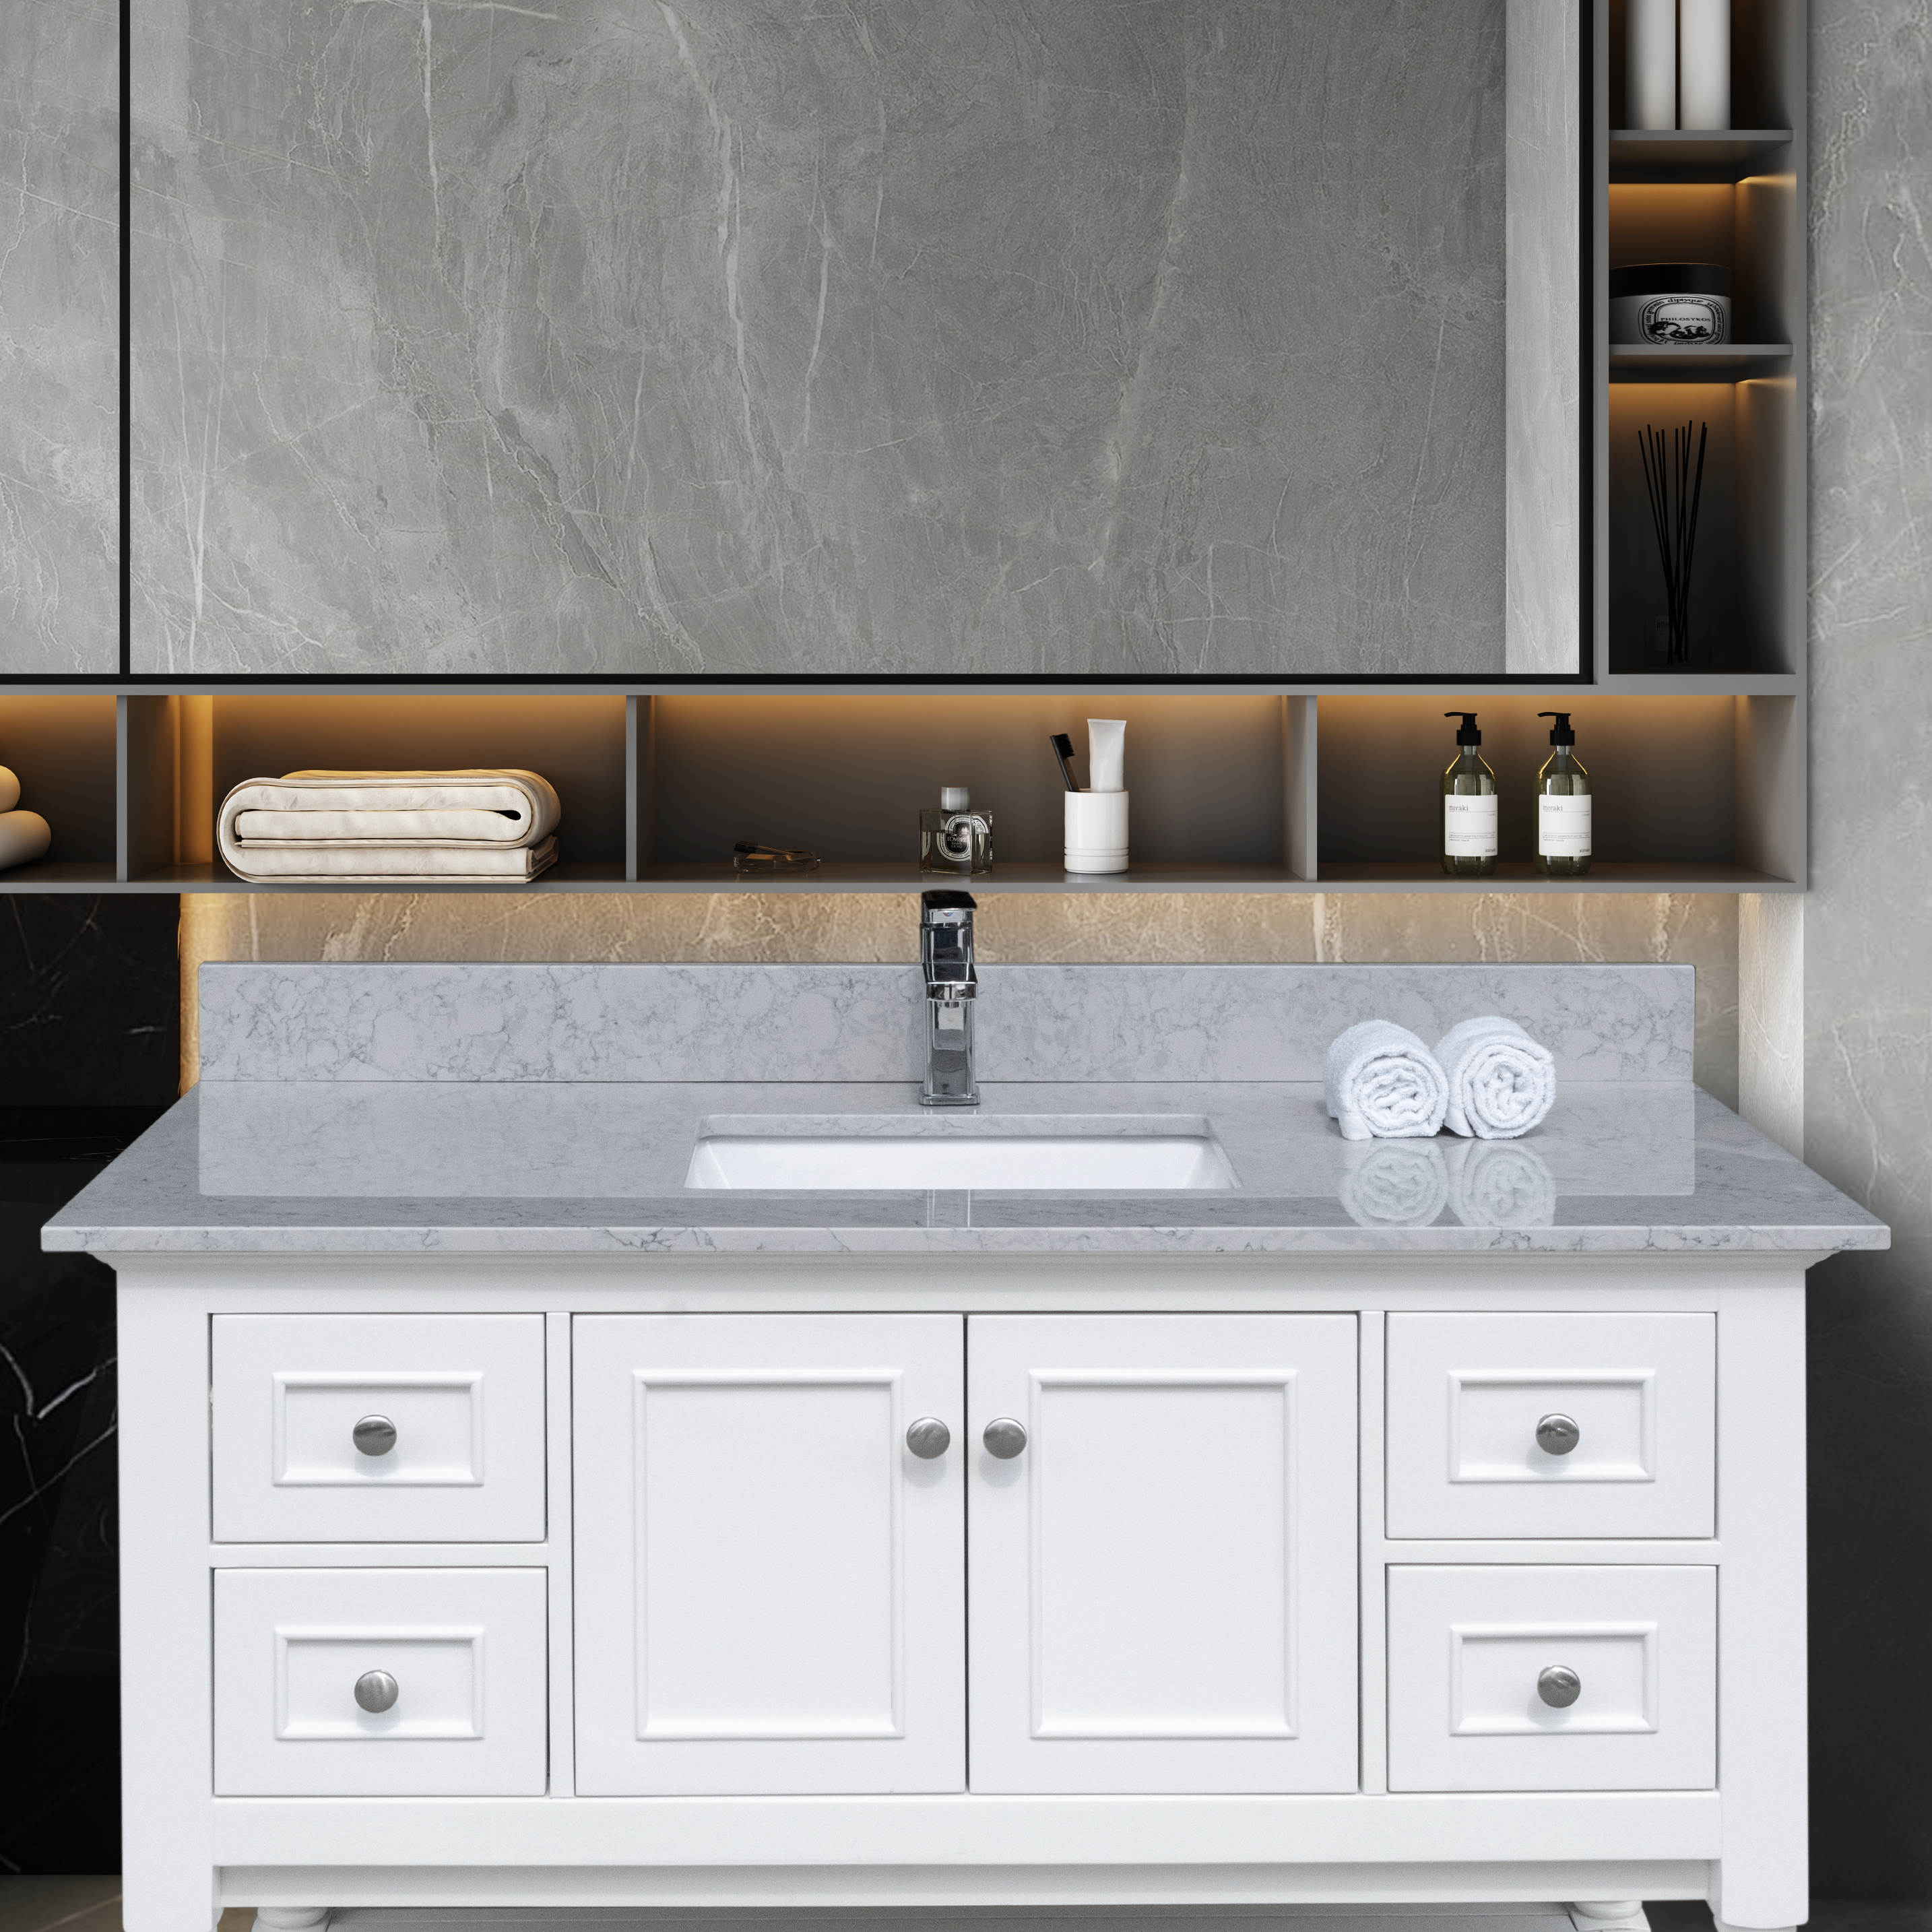 Montary 43 inches bathroom stone vanity top calacatta gray engineered marble color with undermount ceramic sink and single faucet hole with backsplash-Boyel Living